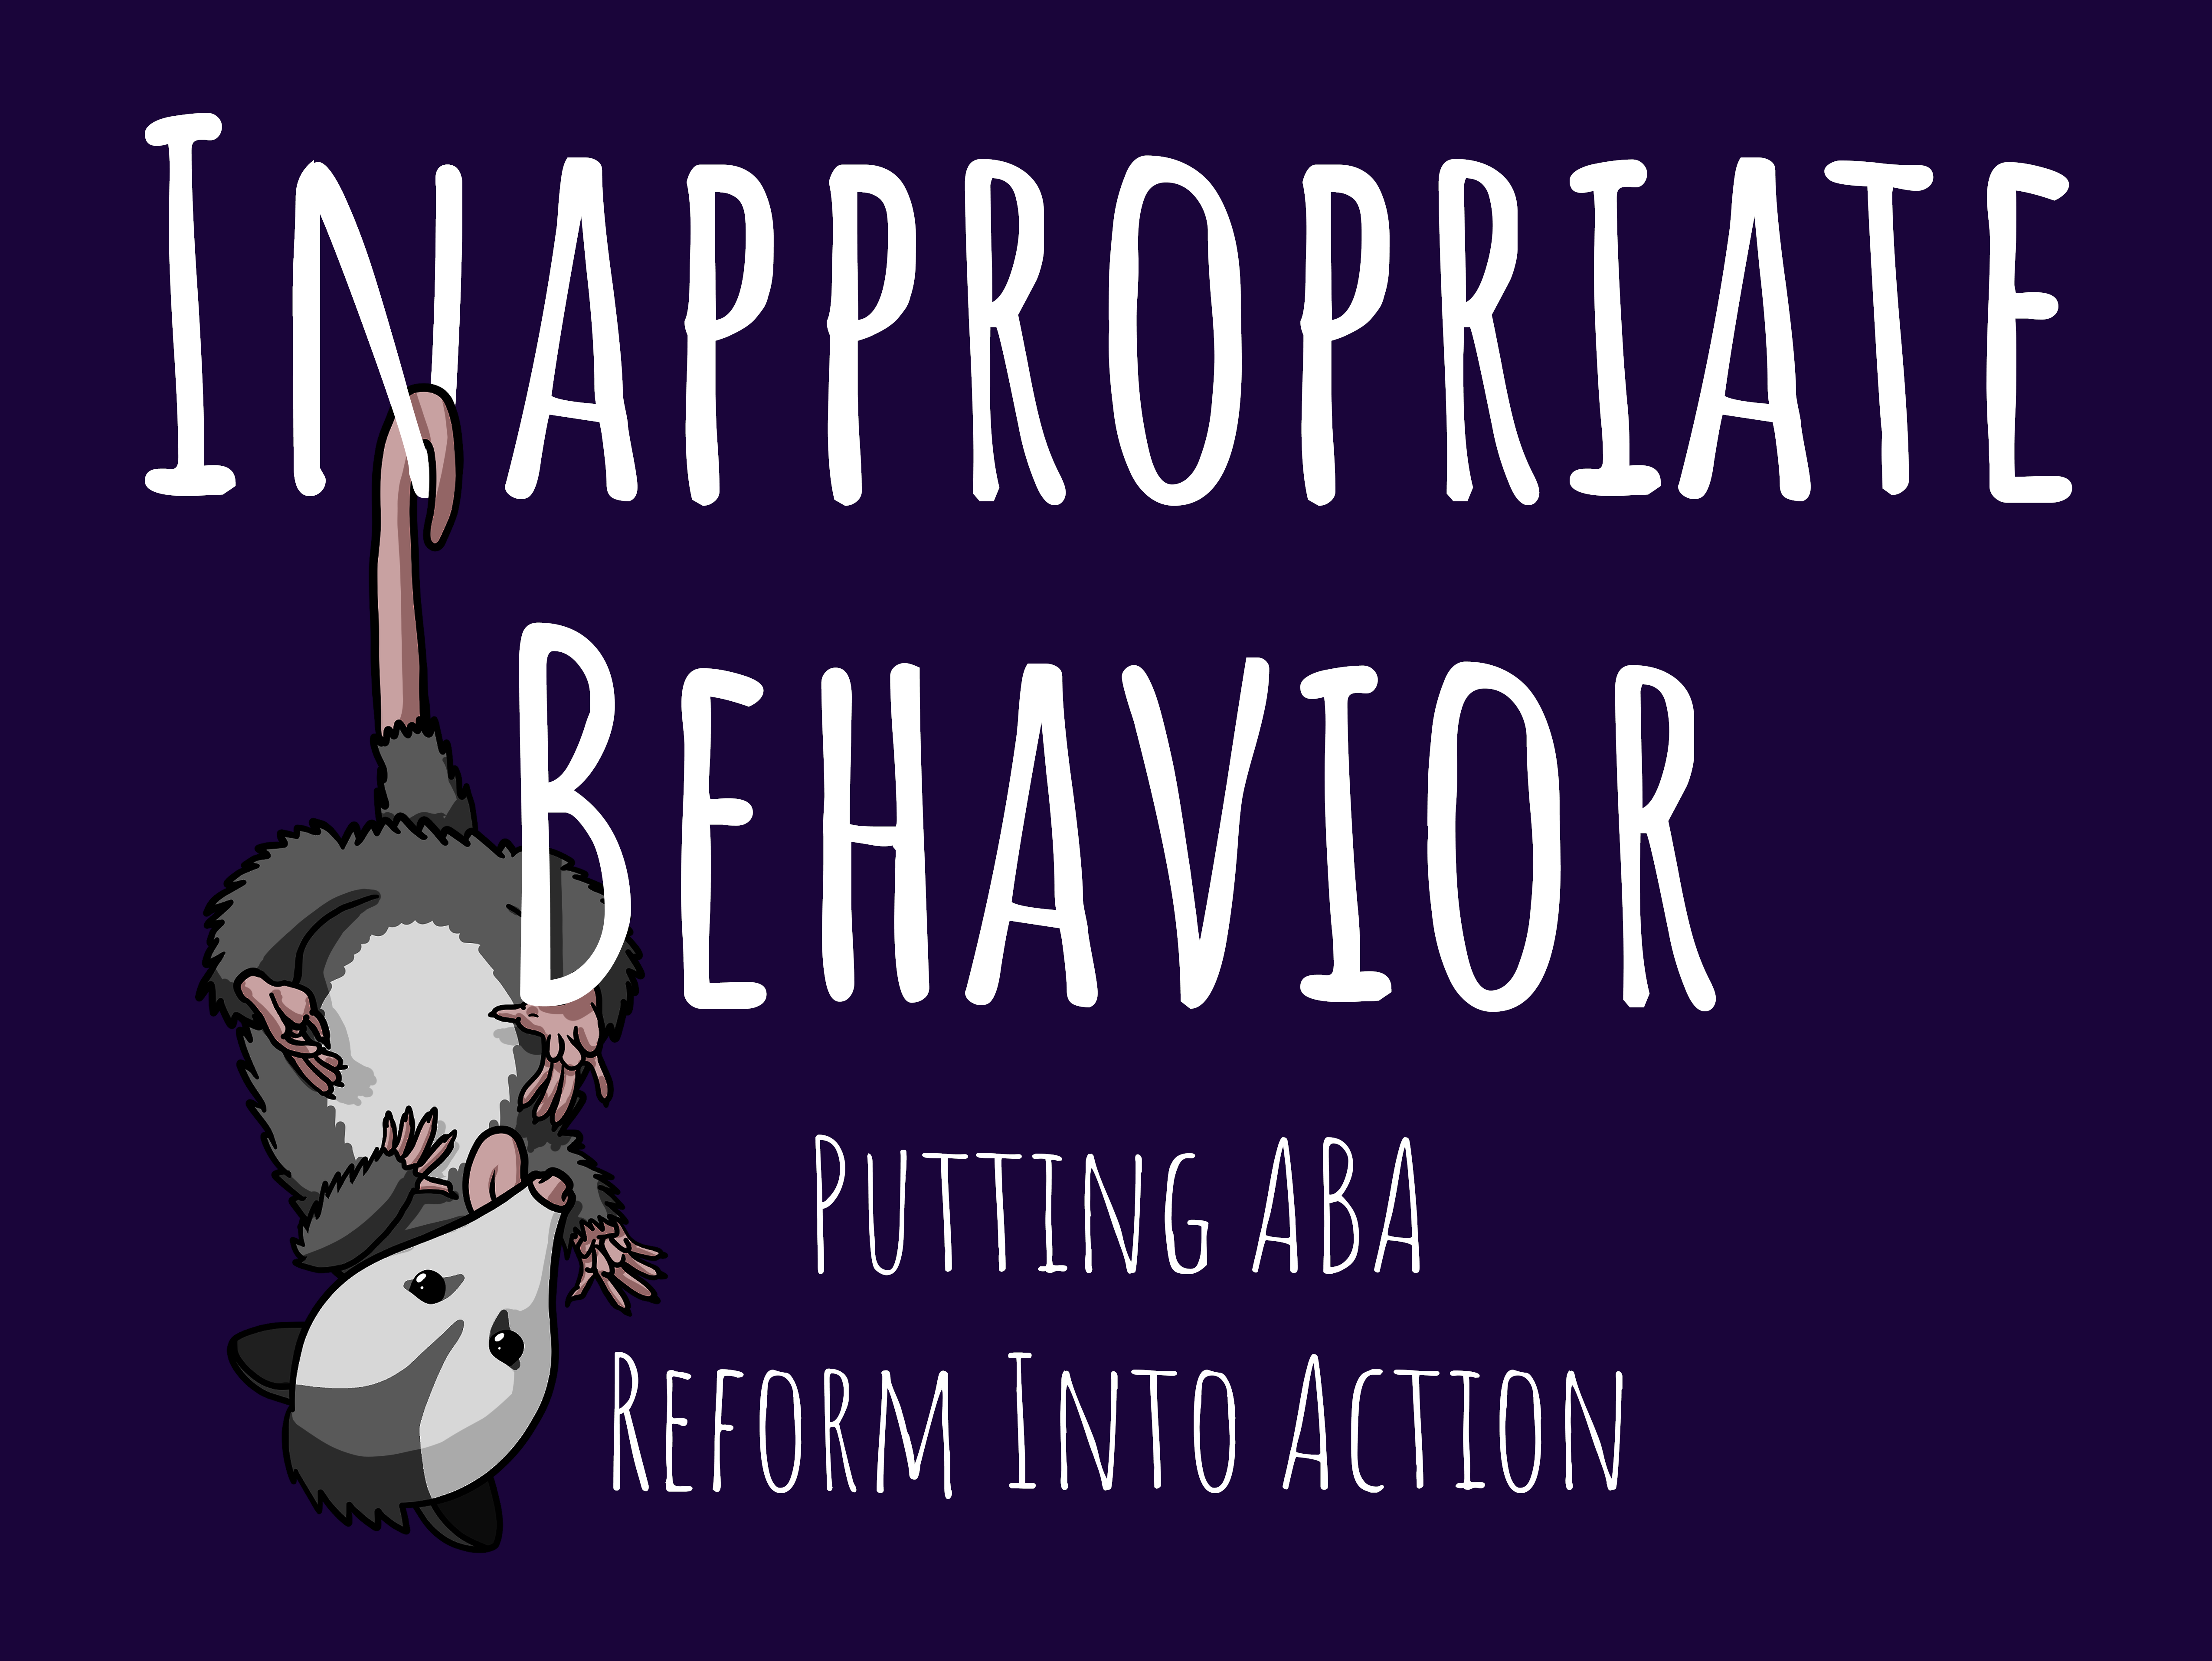 Inappropriate Behavior – Putting ABA Reform Into Action